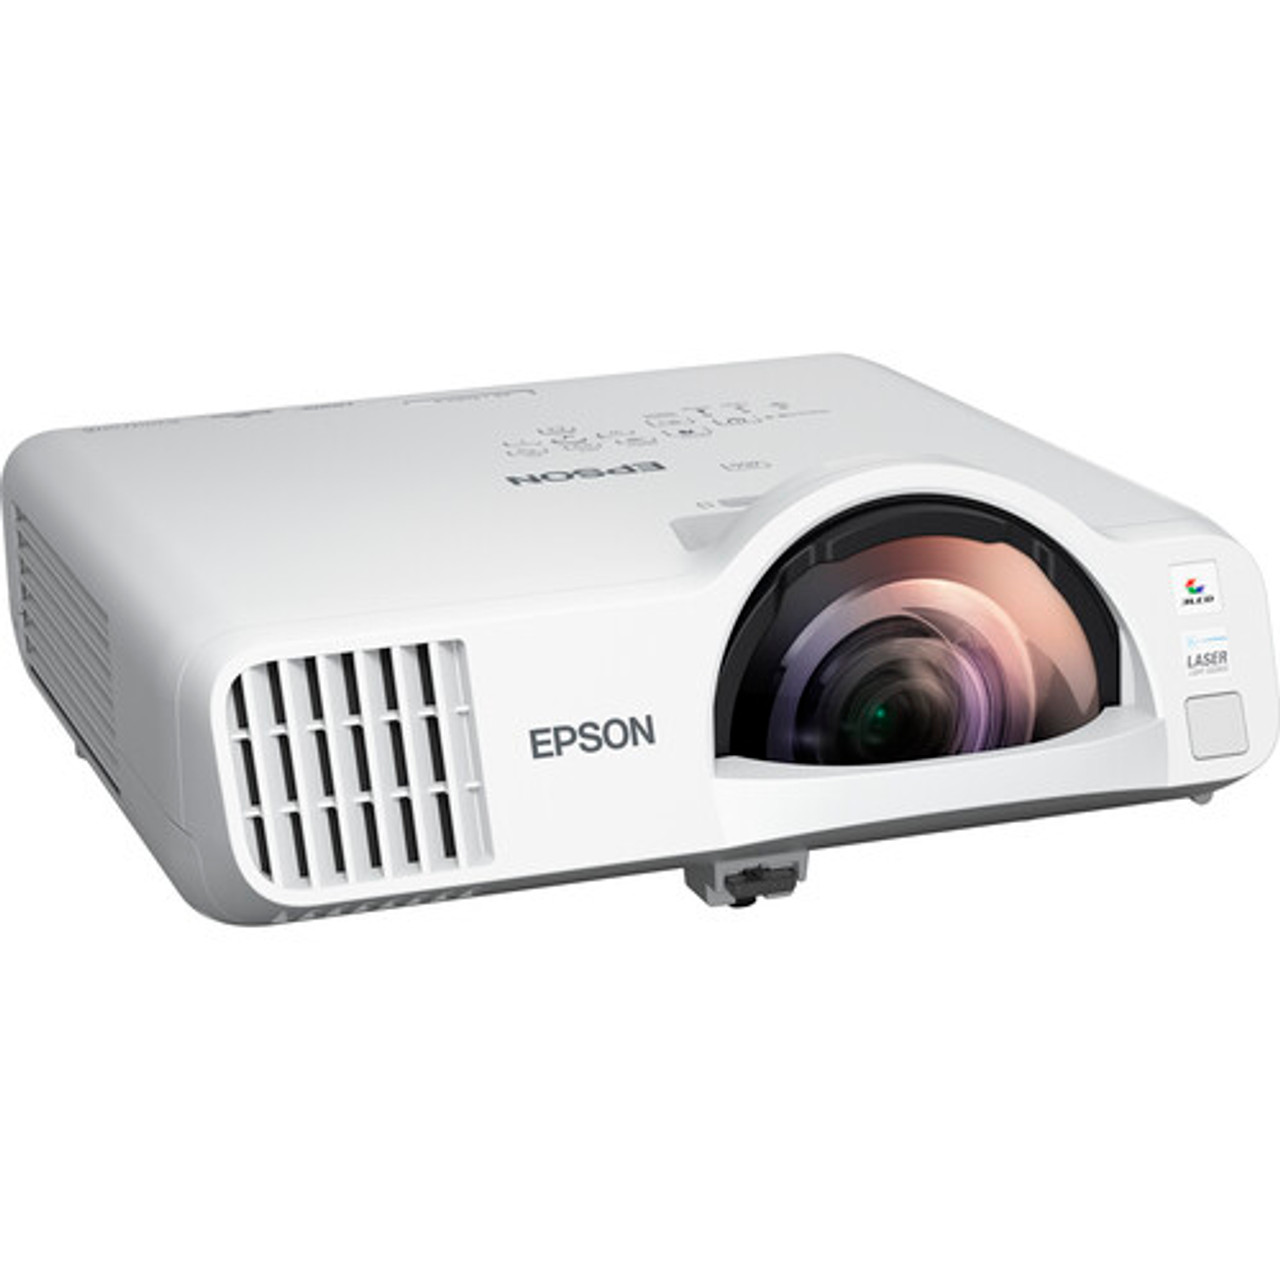 PowerLite L200X 3LCD XGA Laser Projector with Built-in Wireless, Products